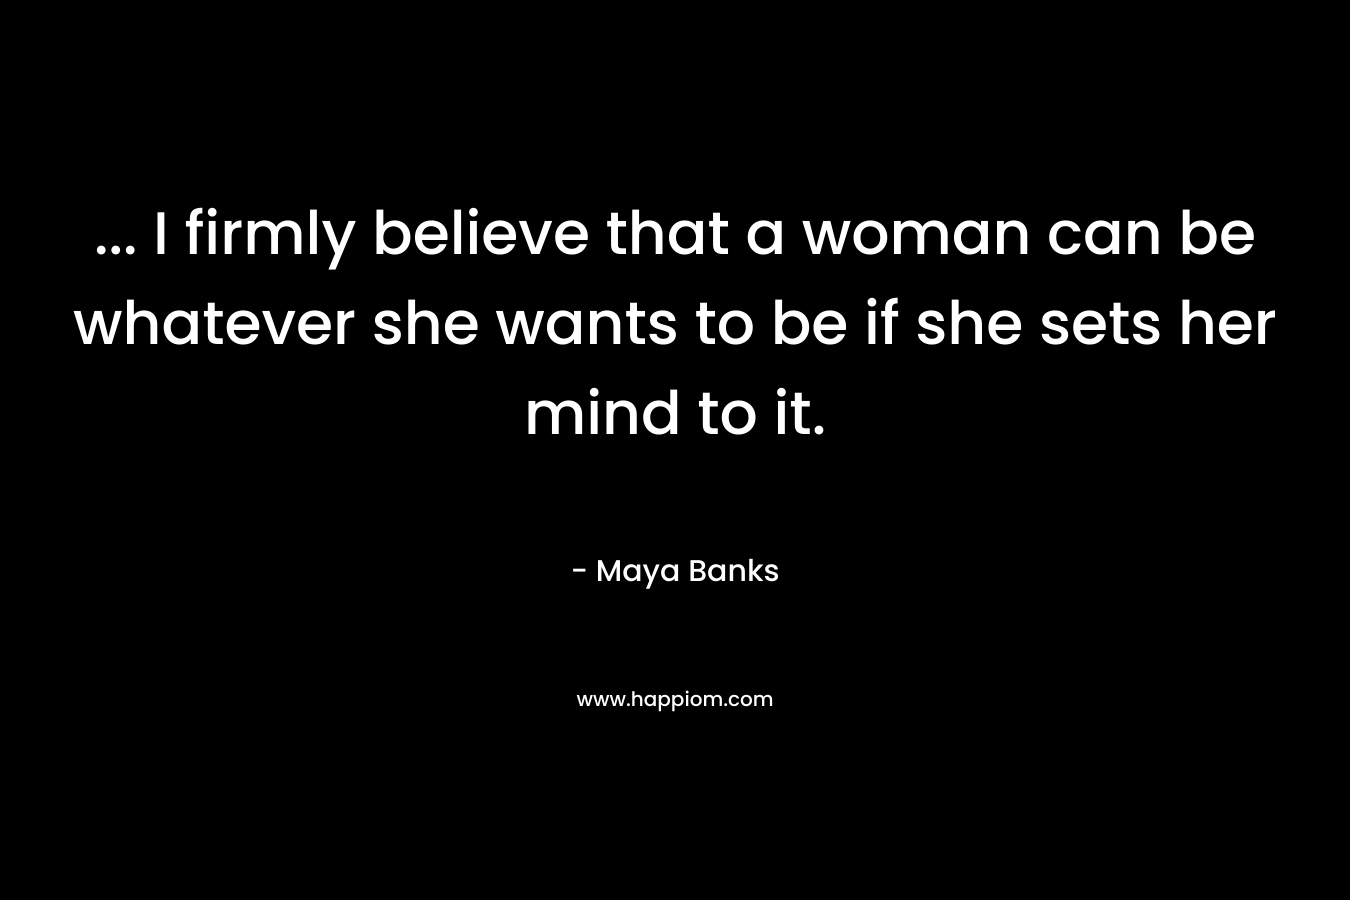 … I firmly believe that a woman can be whatever she wants to be if she sets her mind to it. – Maya Banks